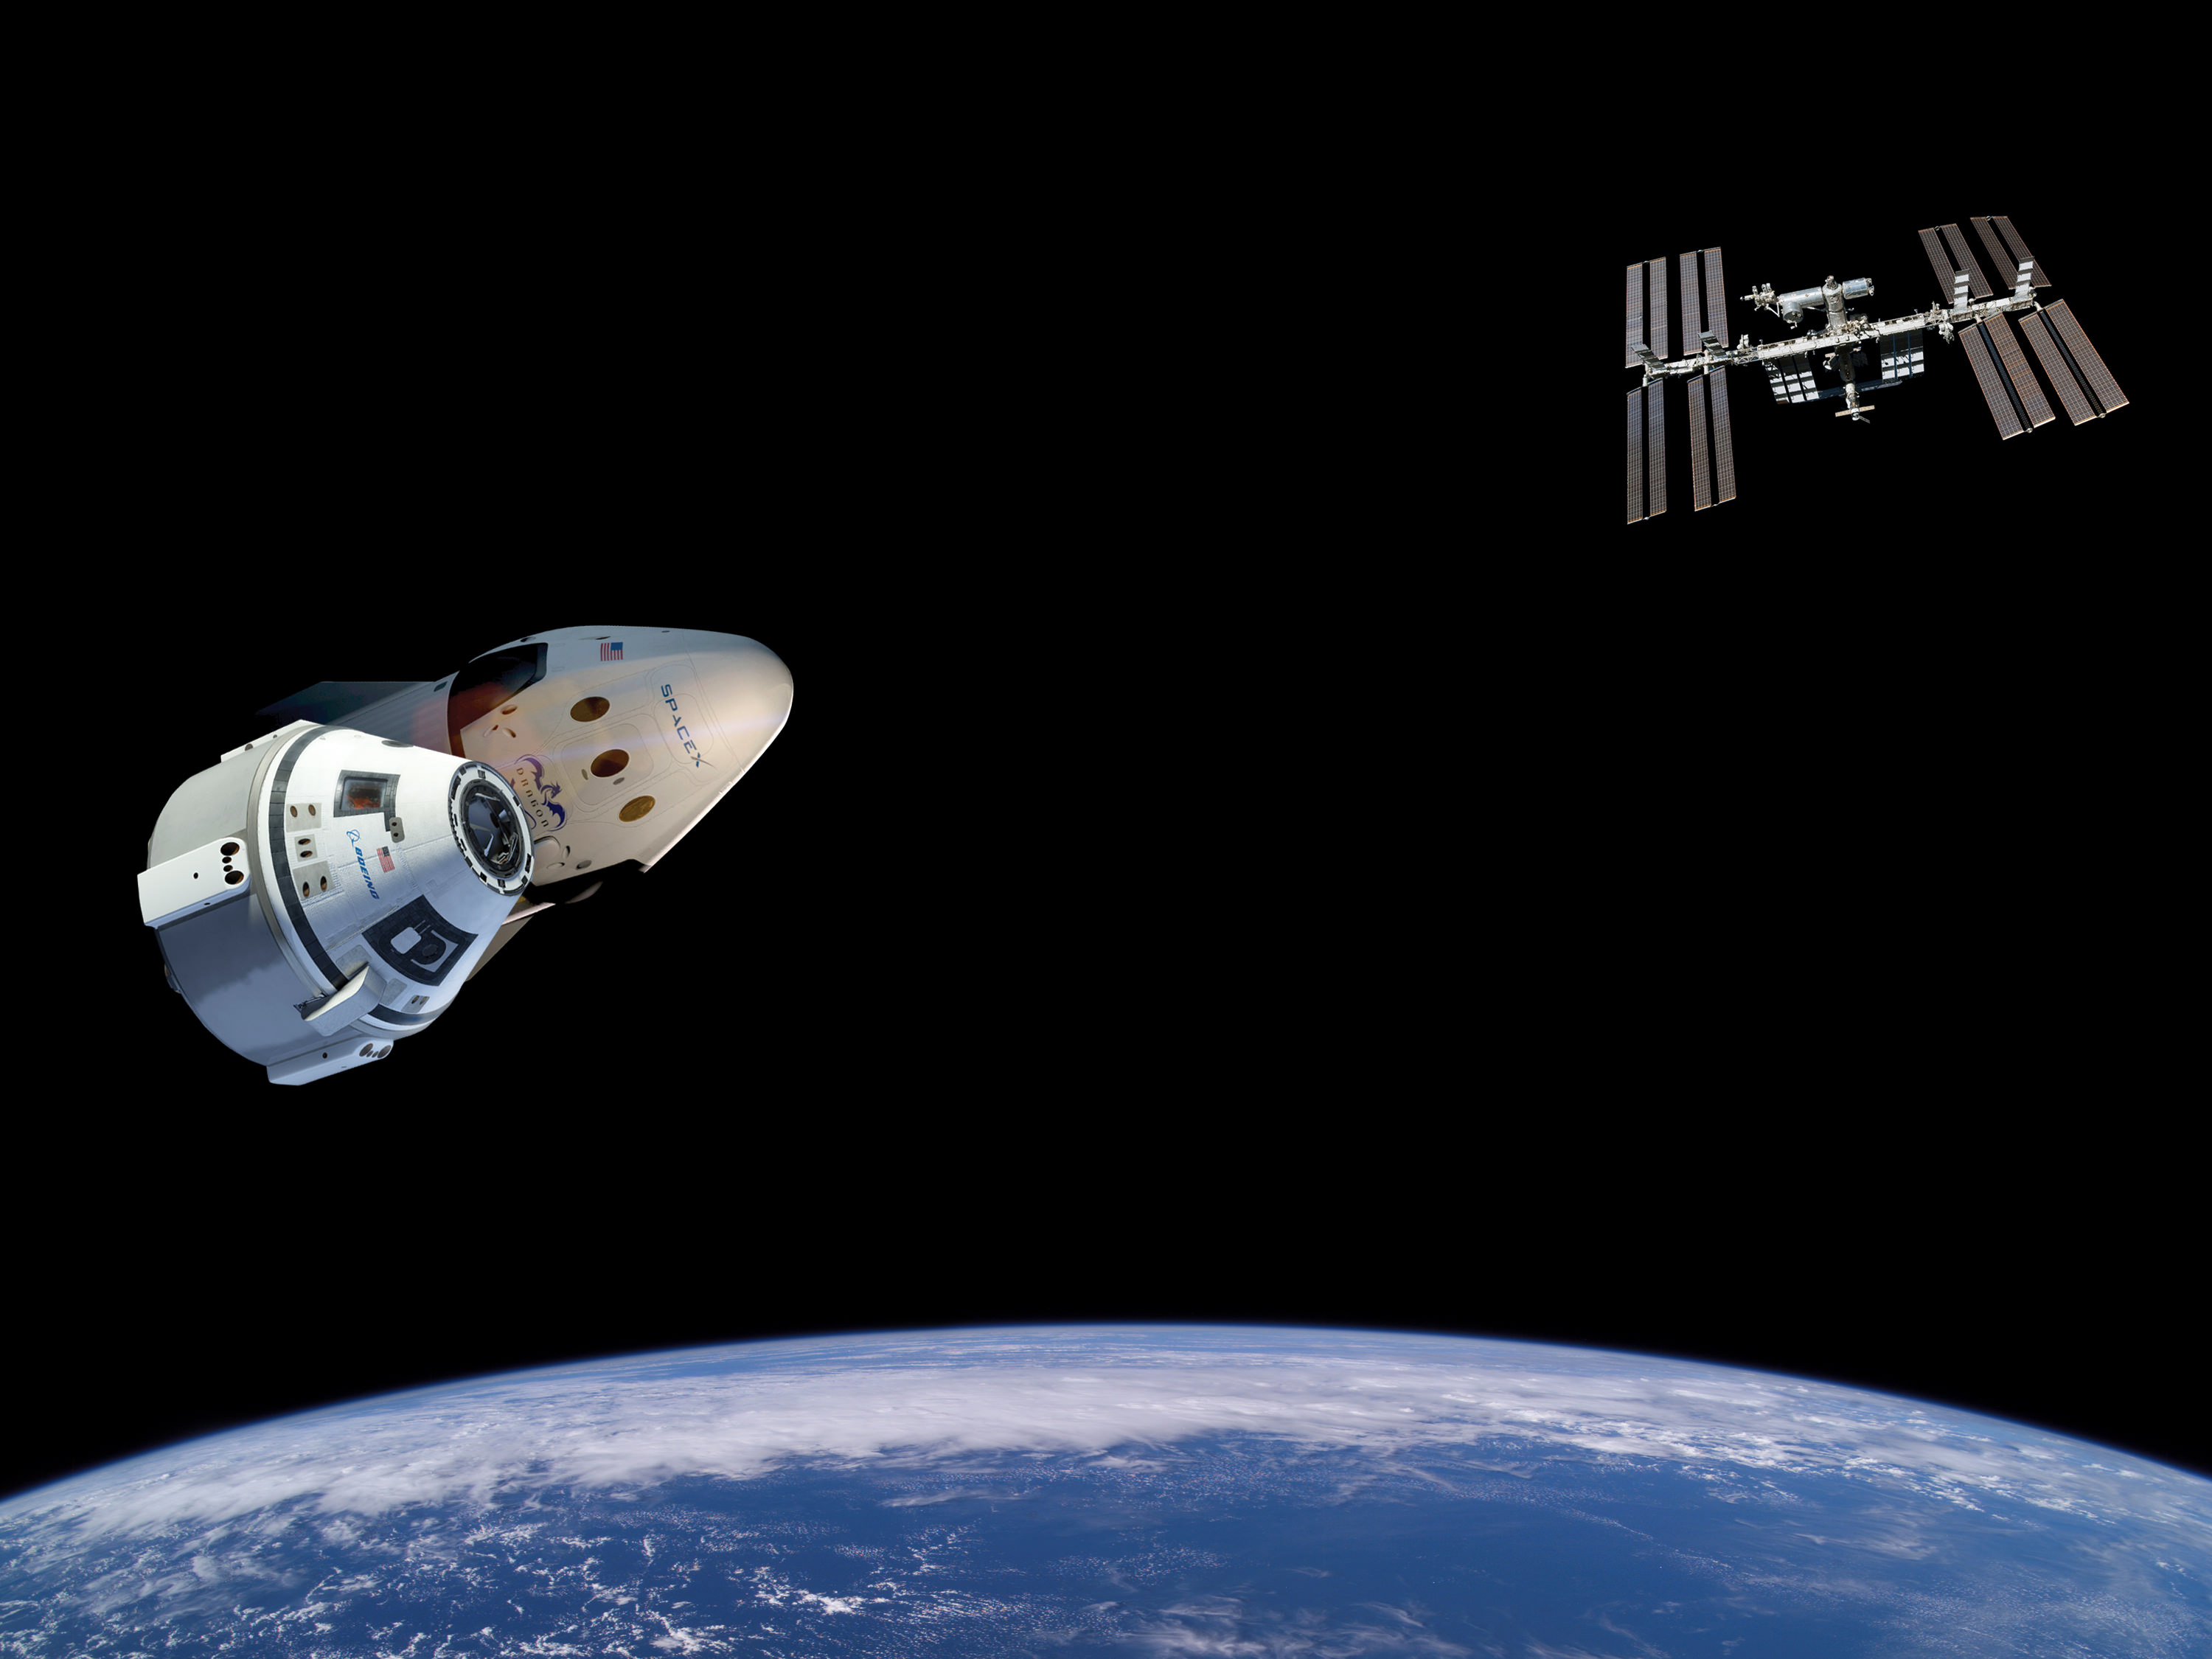 Boeing and SpaceX are building private spaceships to resume launching US astronauts from US soil to the International Space Station in 2017. Credit: NASA